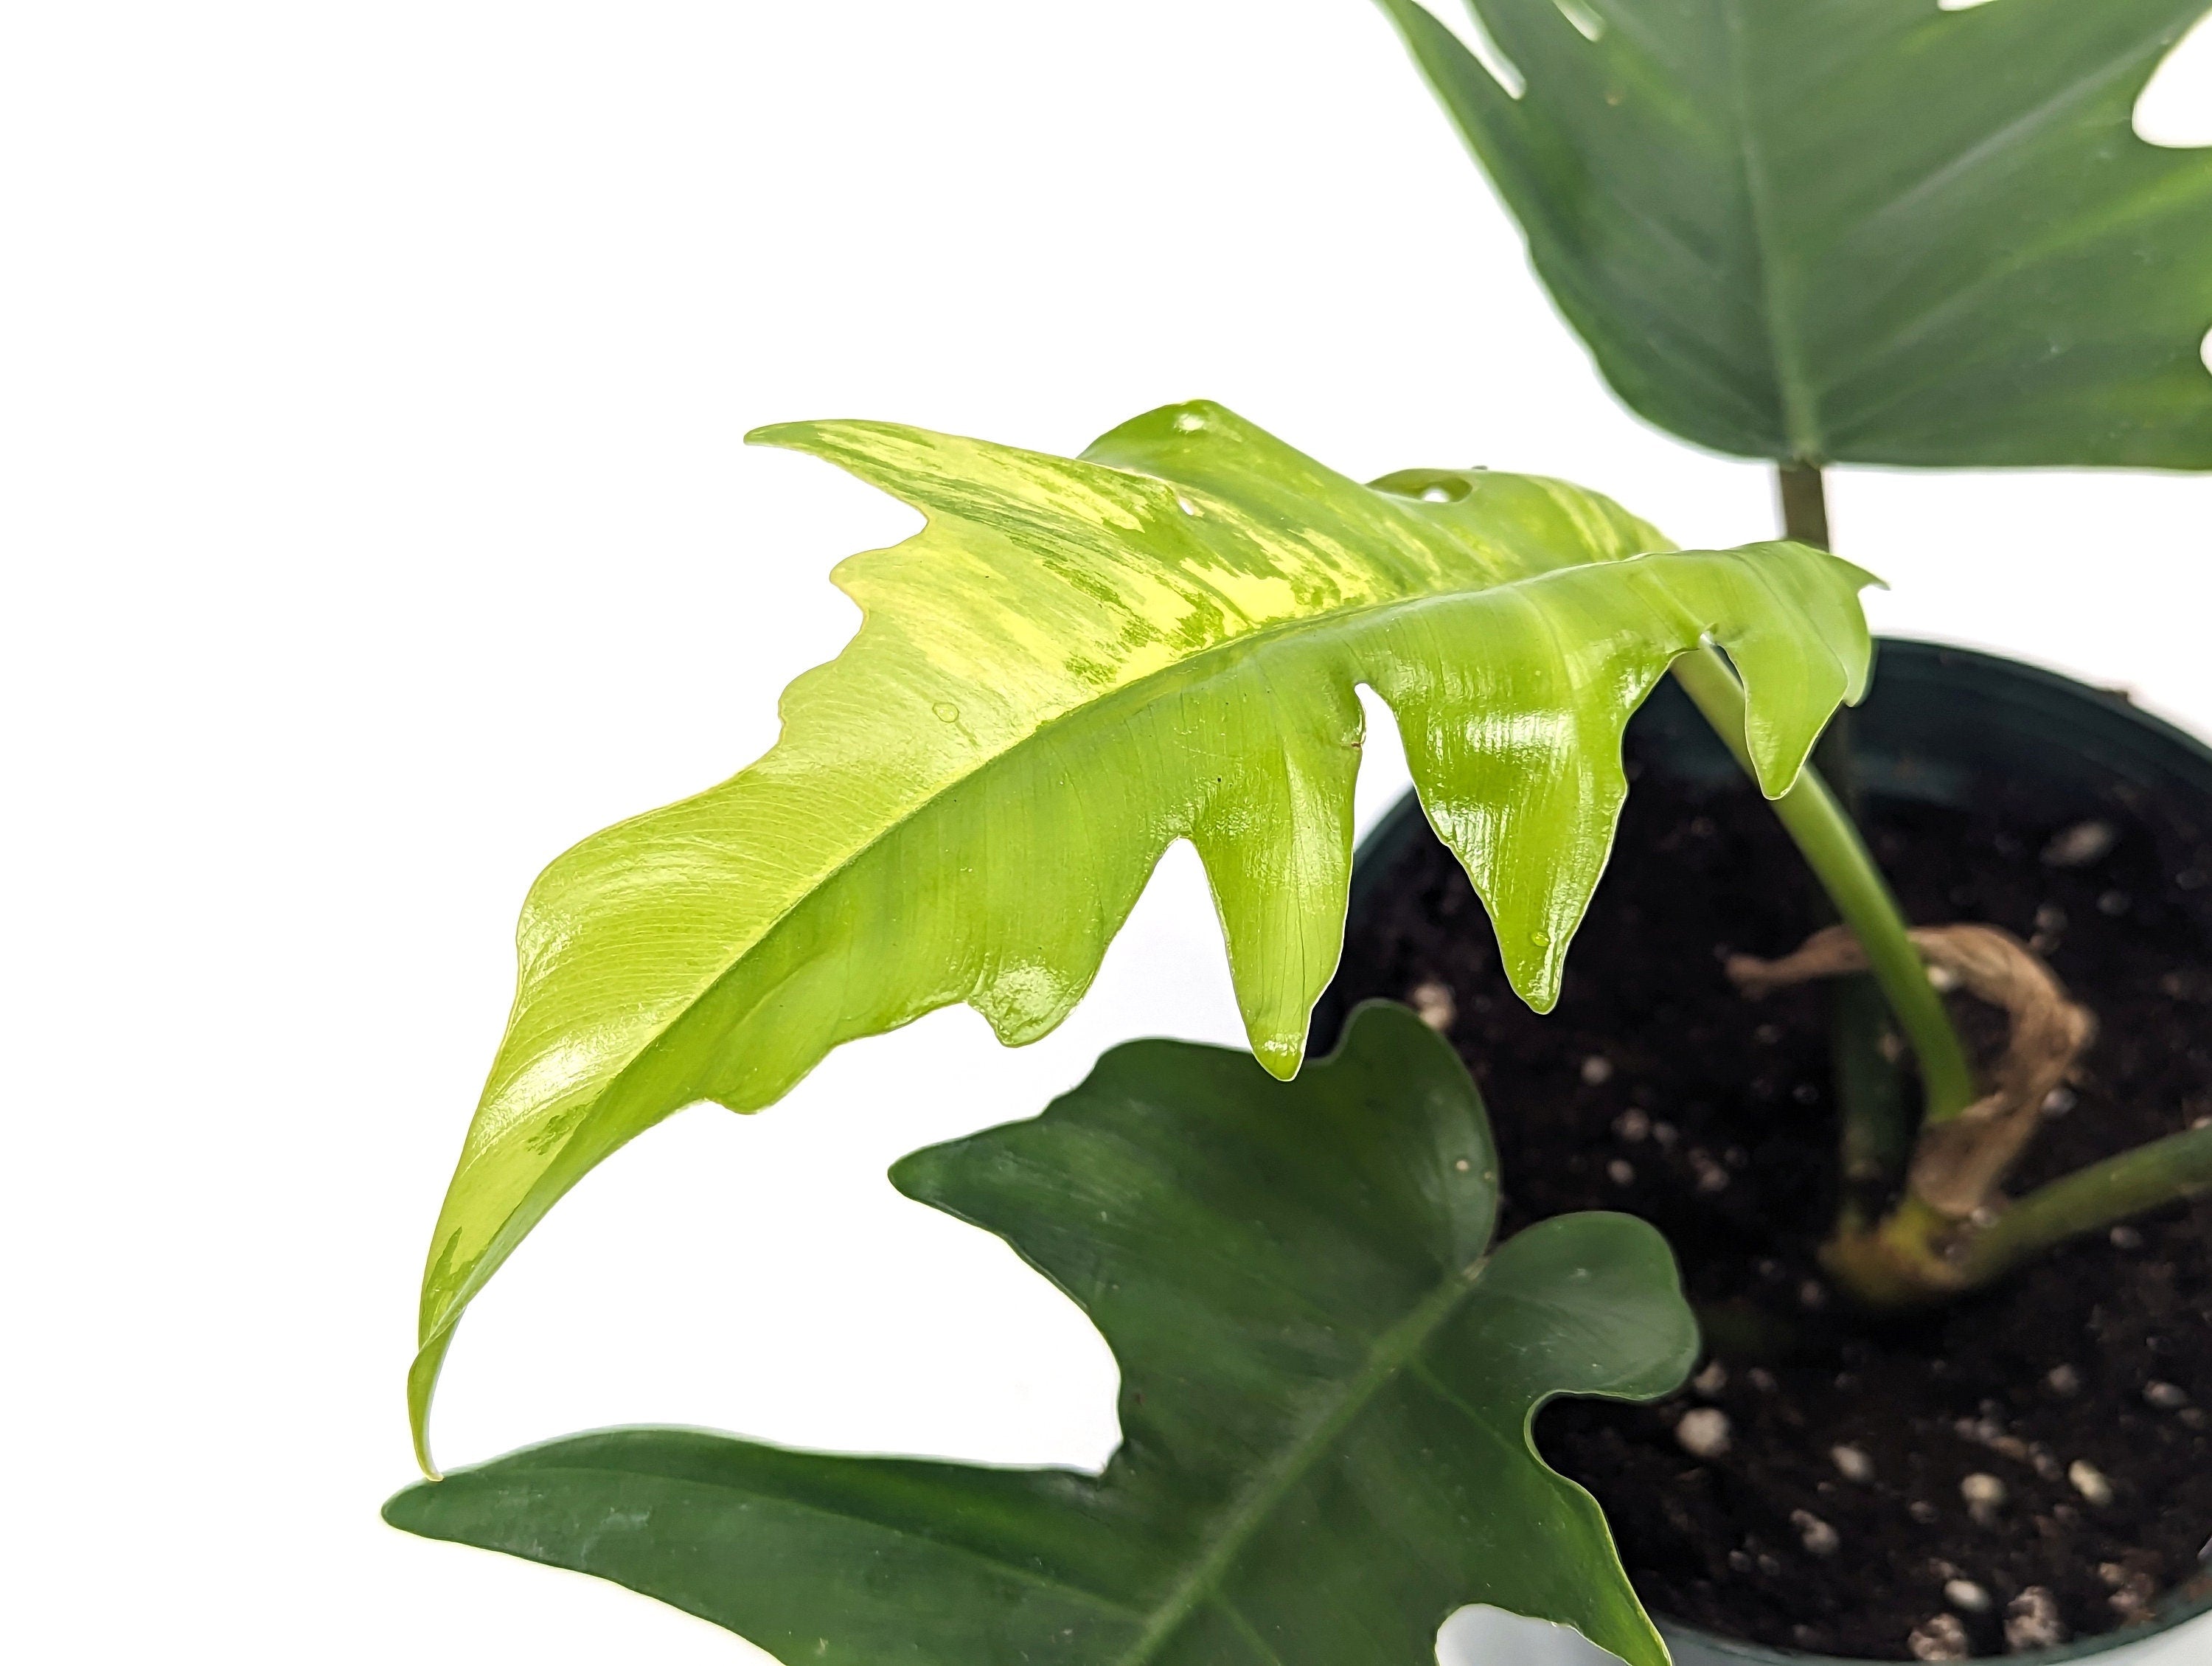 Philodendron Tortum x Florida Beauty Variegated - NEW HYBRID Plant Exact ID 